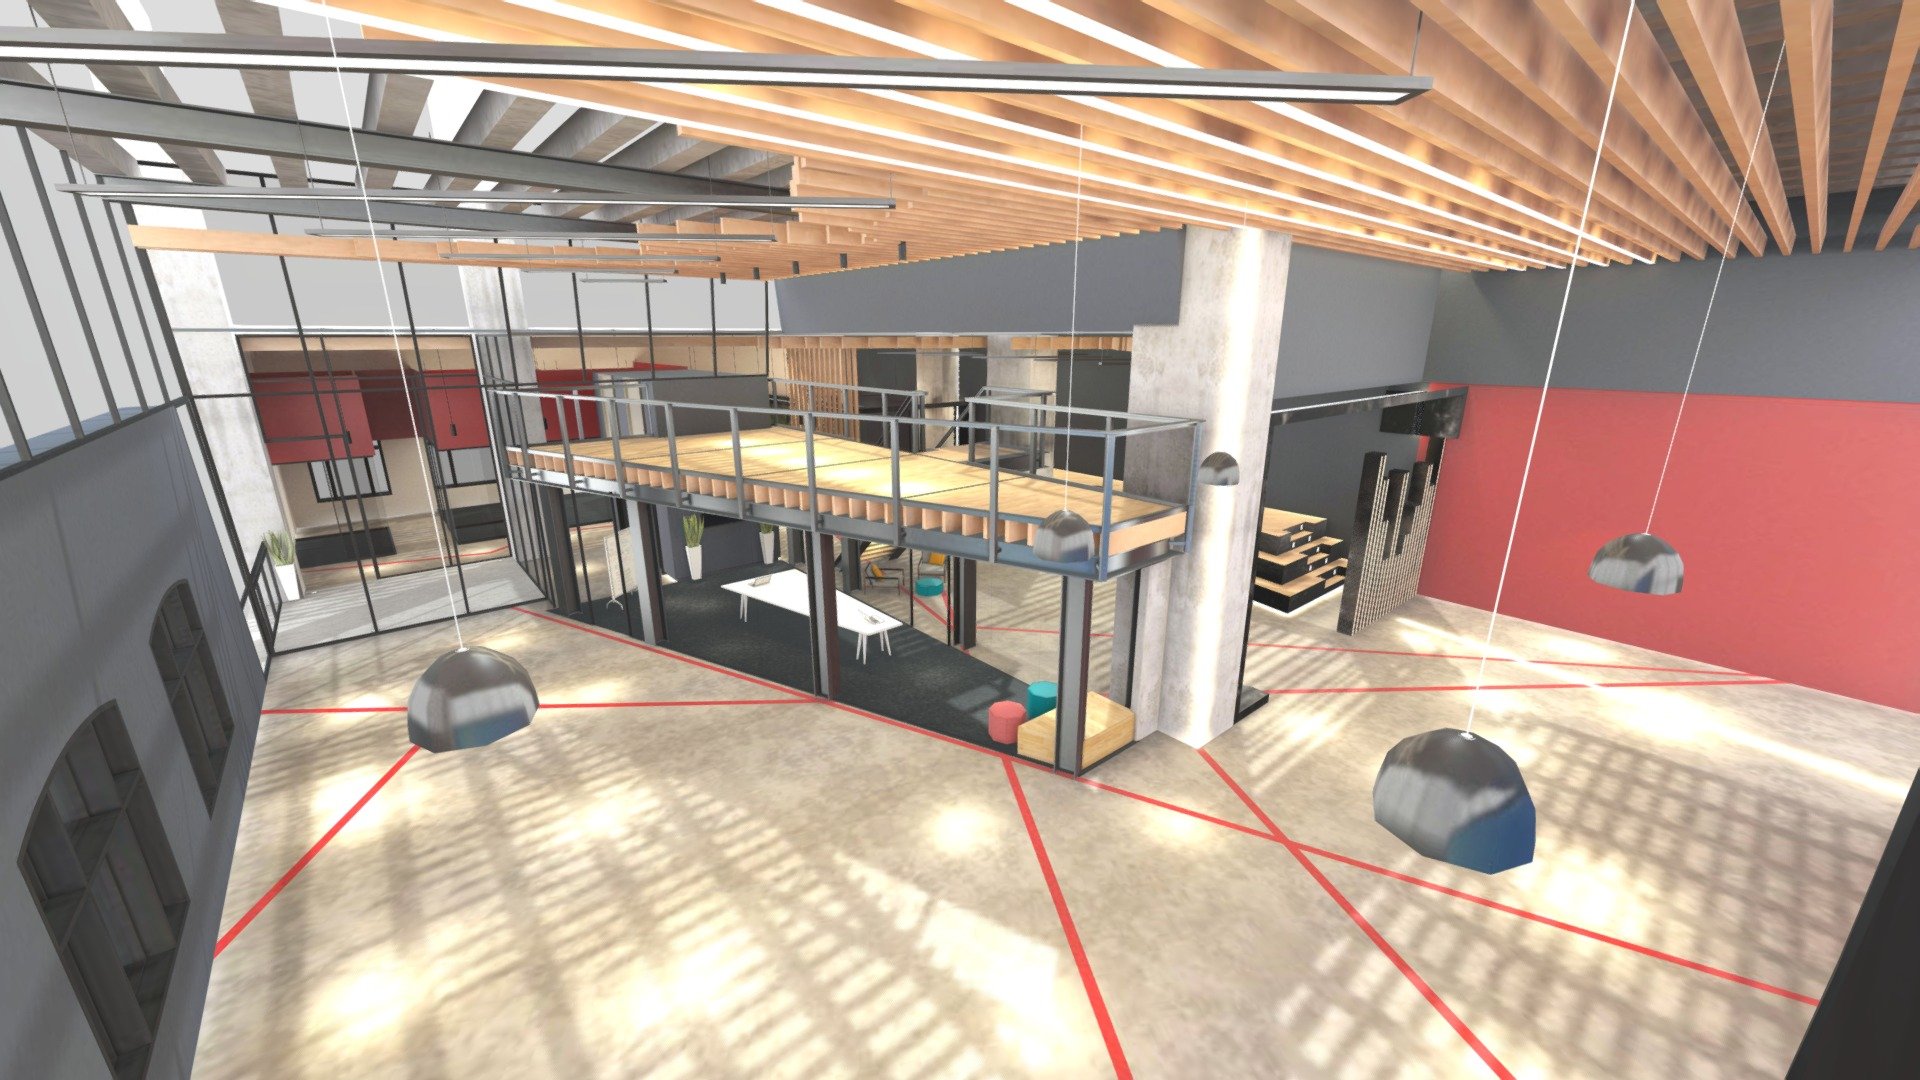 A warehouse-style co-working office space styled in Glass, Steel and repurposed wood. Large meeting areas, two small offices, presentation area, conference room and loft space. Baked texture and lighting, optimized for Metaverse use. Used with collision layer: https://skfb.ly/oCVot

This metaverse environment is available as a default template on Vatom Spaces - spaces.vatom.com

Sign up for a free account now for your own infinite* metaverse space, with 1GB of storage and up to 25 guests at a time for free. Upload any GLBs to create and customize your environment 3d model